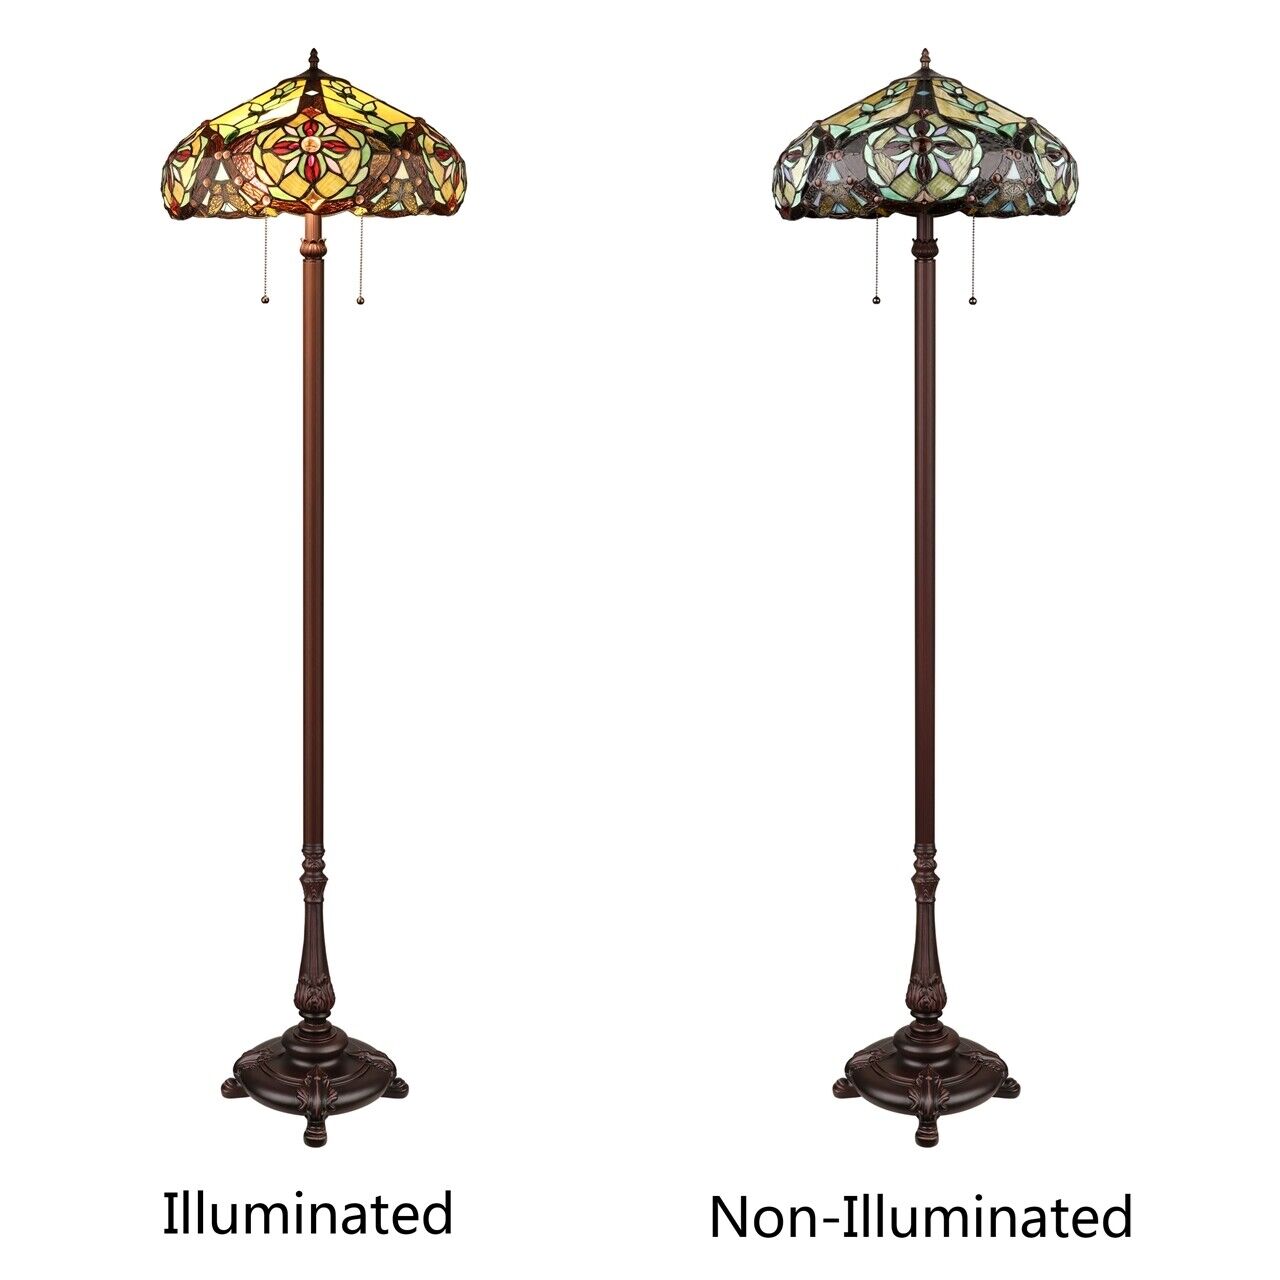 65 1/2" Antique Style Stained Glass 2 light Pull Chain Floor Lamp